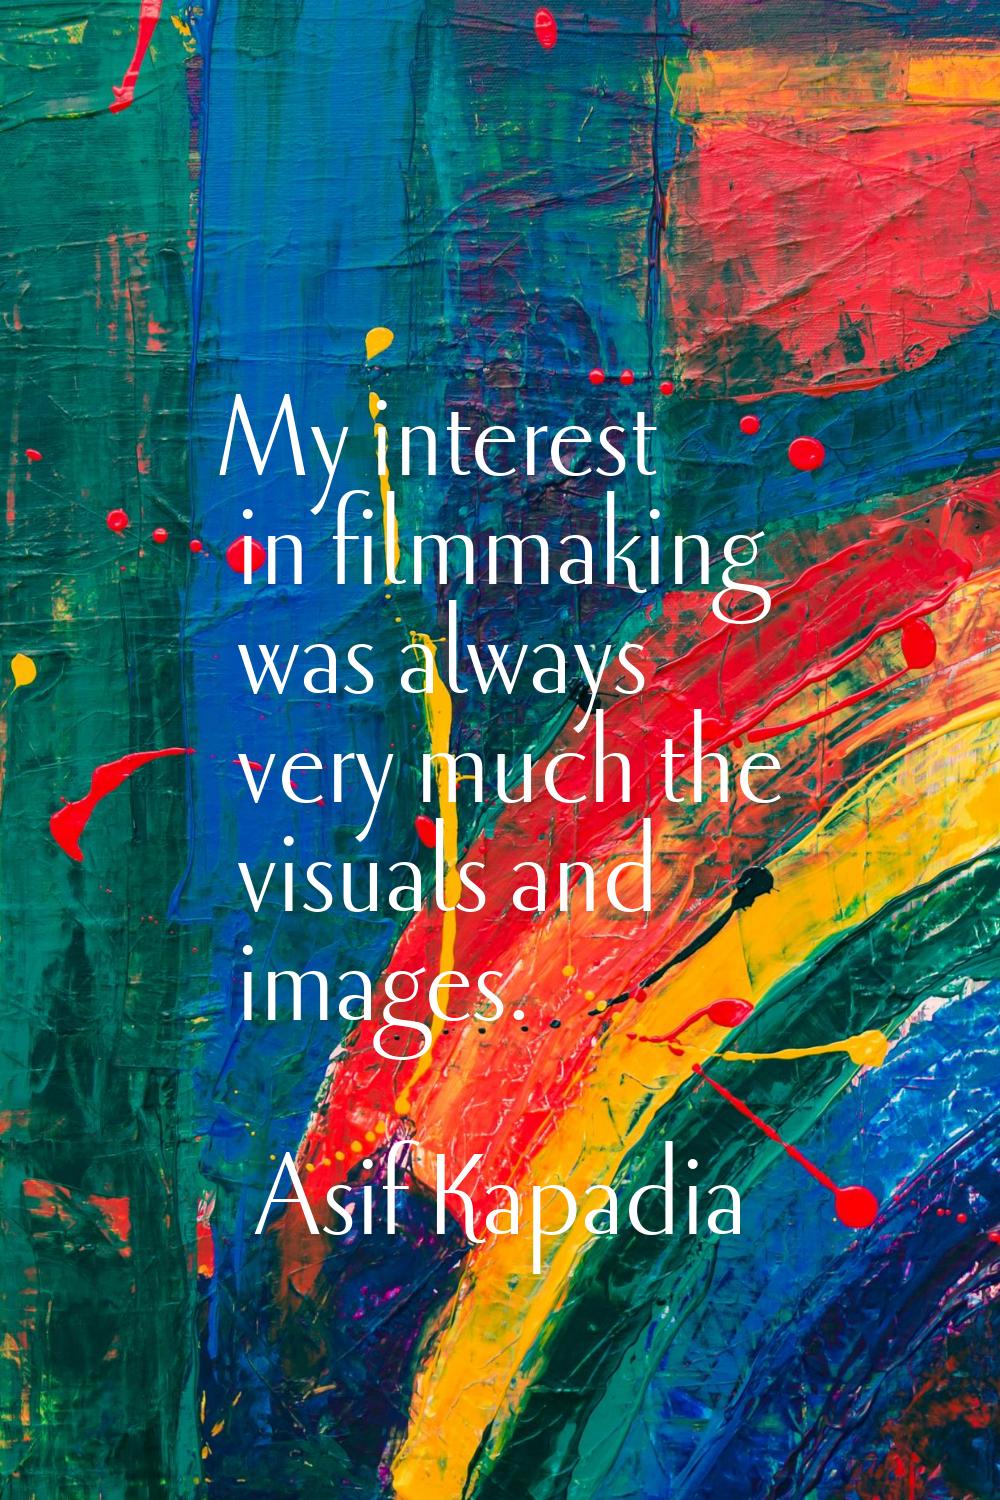 My interest in filmmaking was always very much the visuals and images.